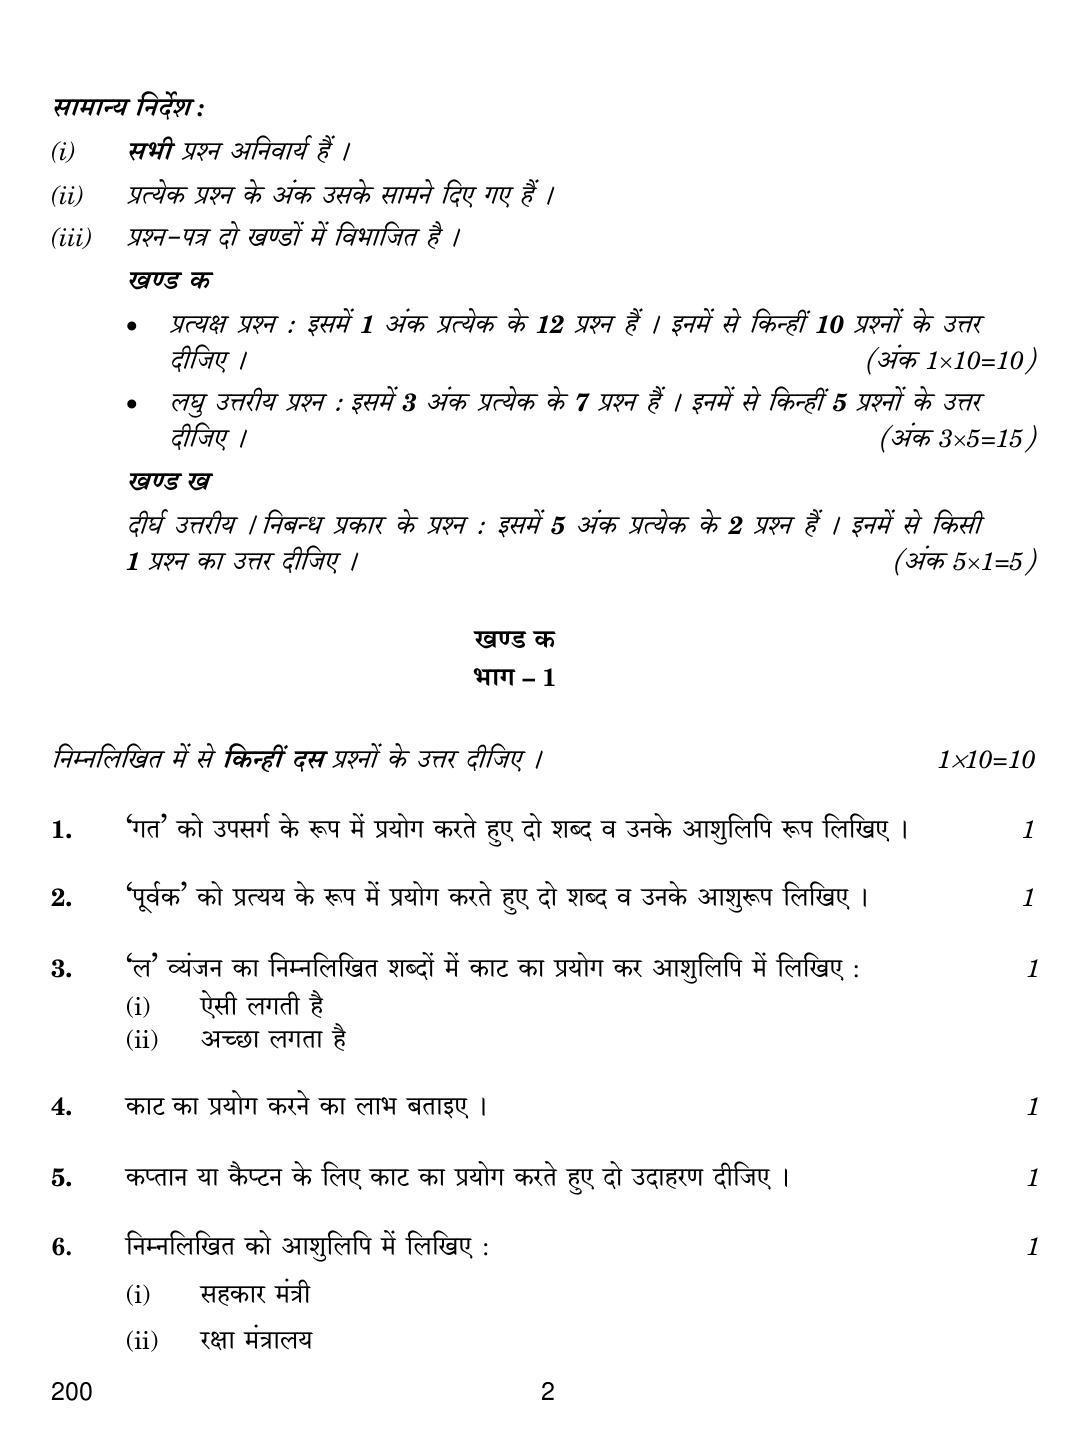 CBSE Class 12 200 SHORTHAND HINDI 2019 Compartment Question Paper - Page 2